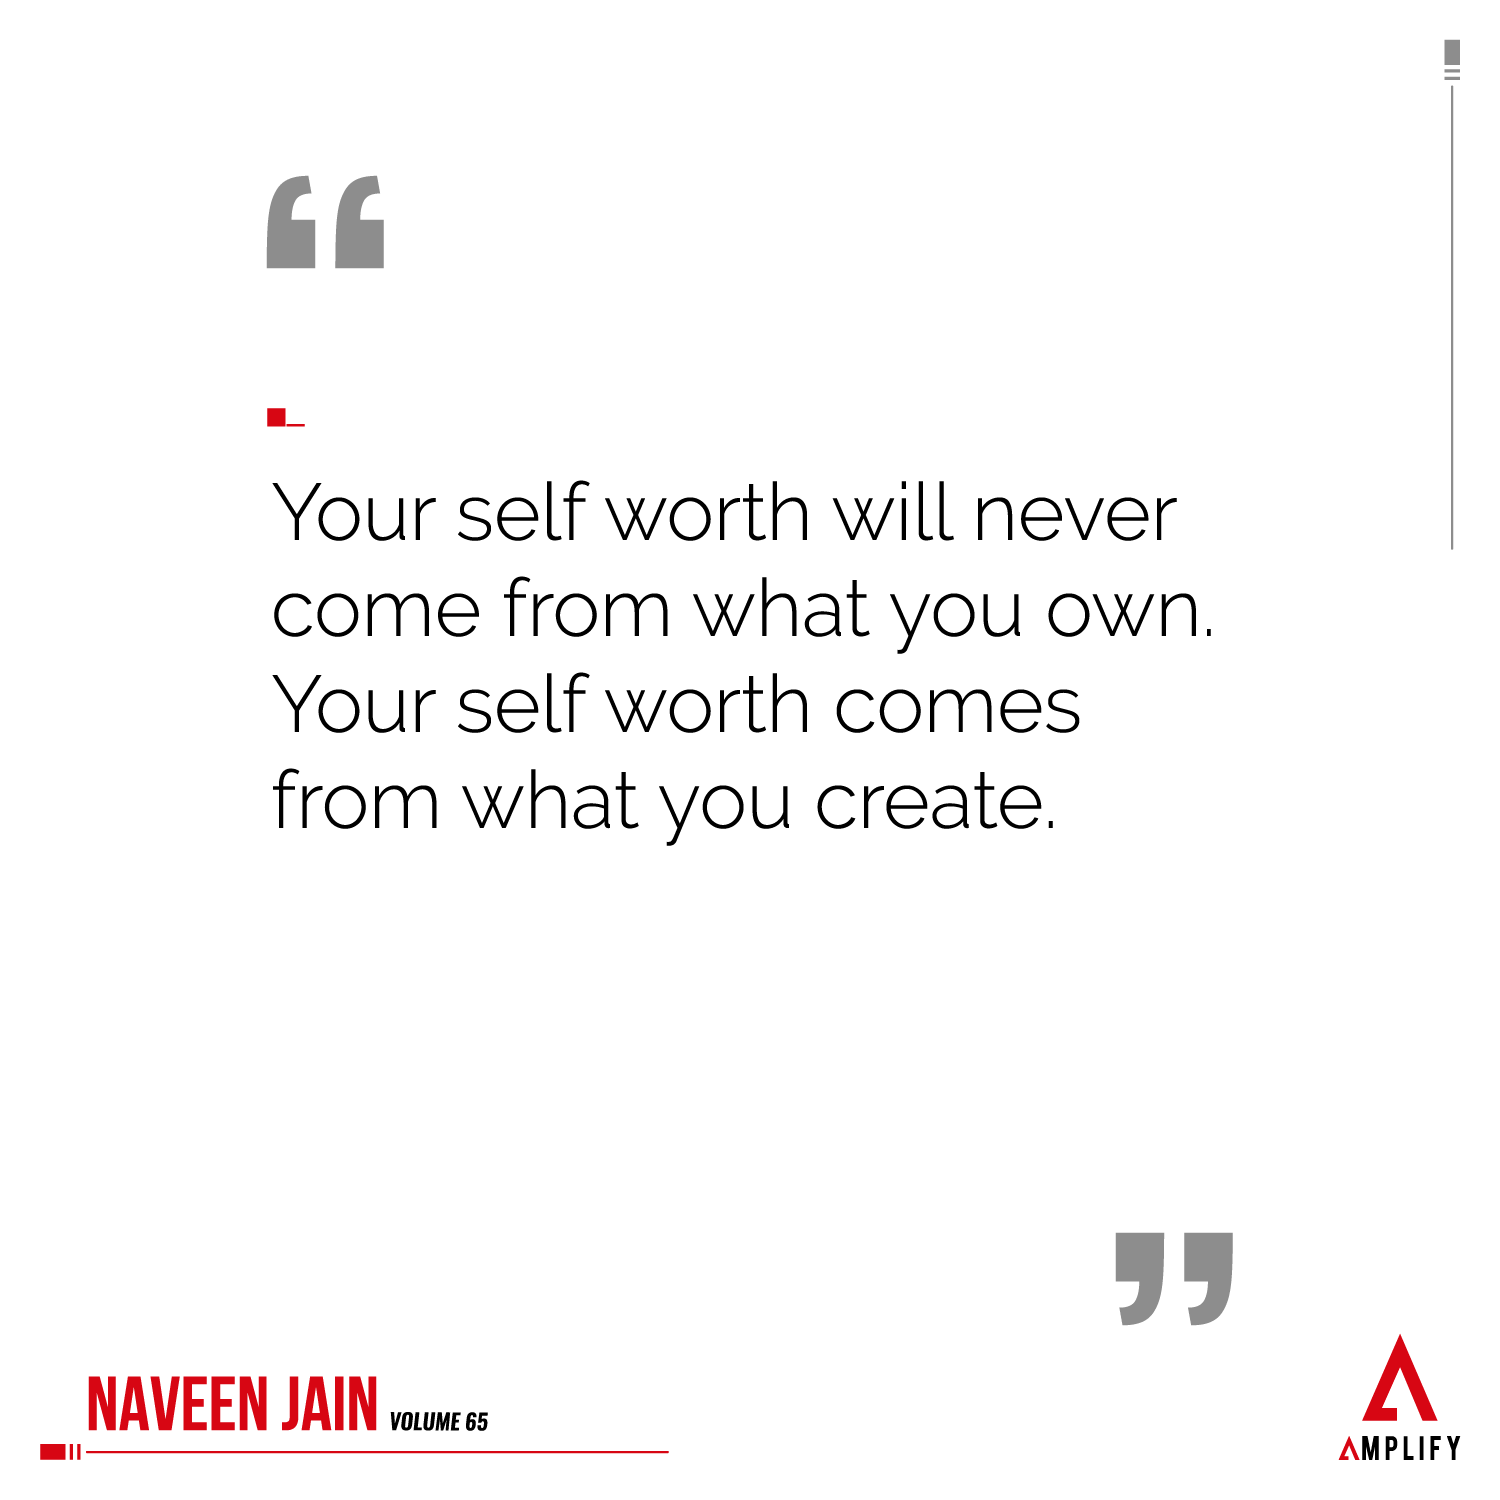 Quote: Your self worth will never come from what you own. Your self worth comes from what you create.”